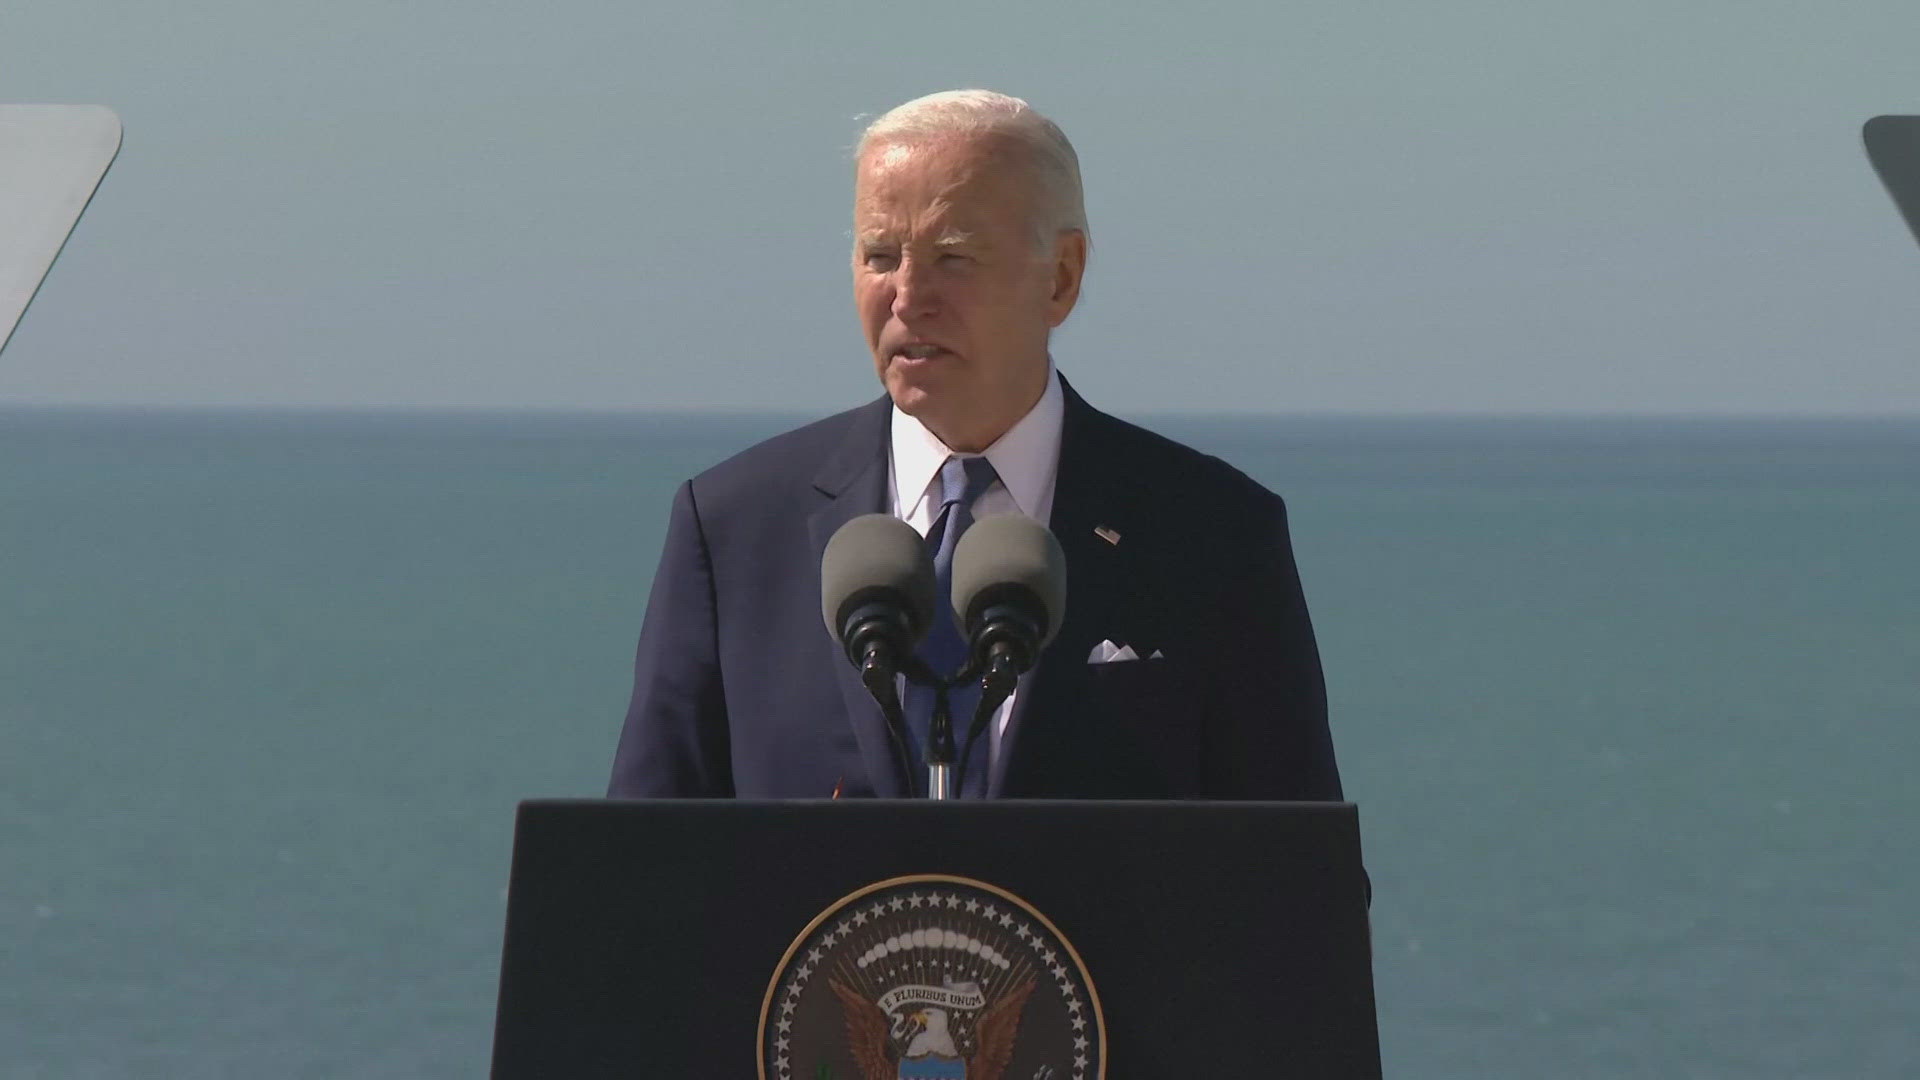 D-Day was the largest amphibious assault in history, and Biden called it a “powerful illustration of how alliances, real alliances make us stronger.”